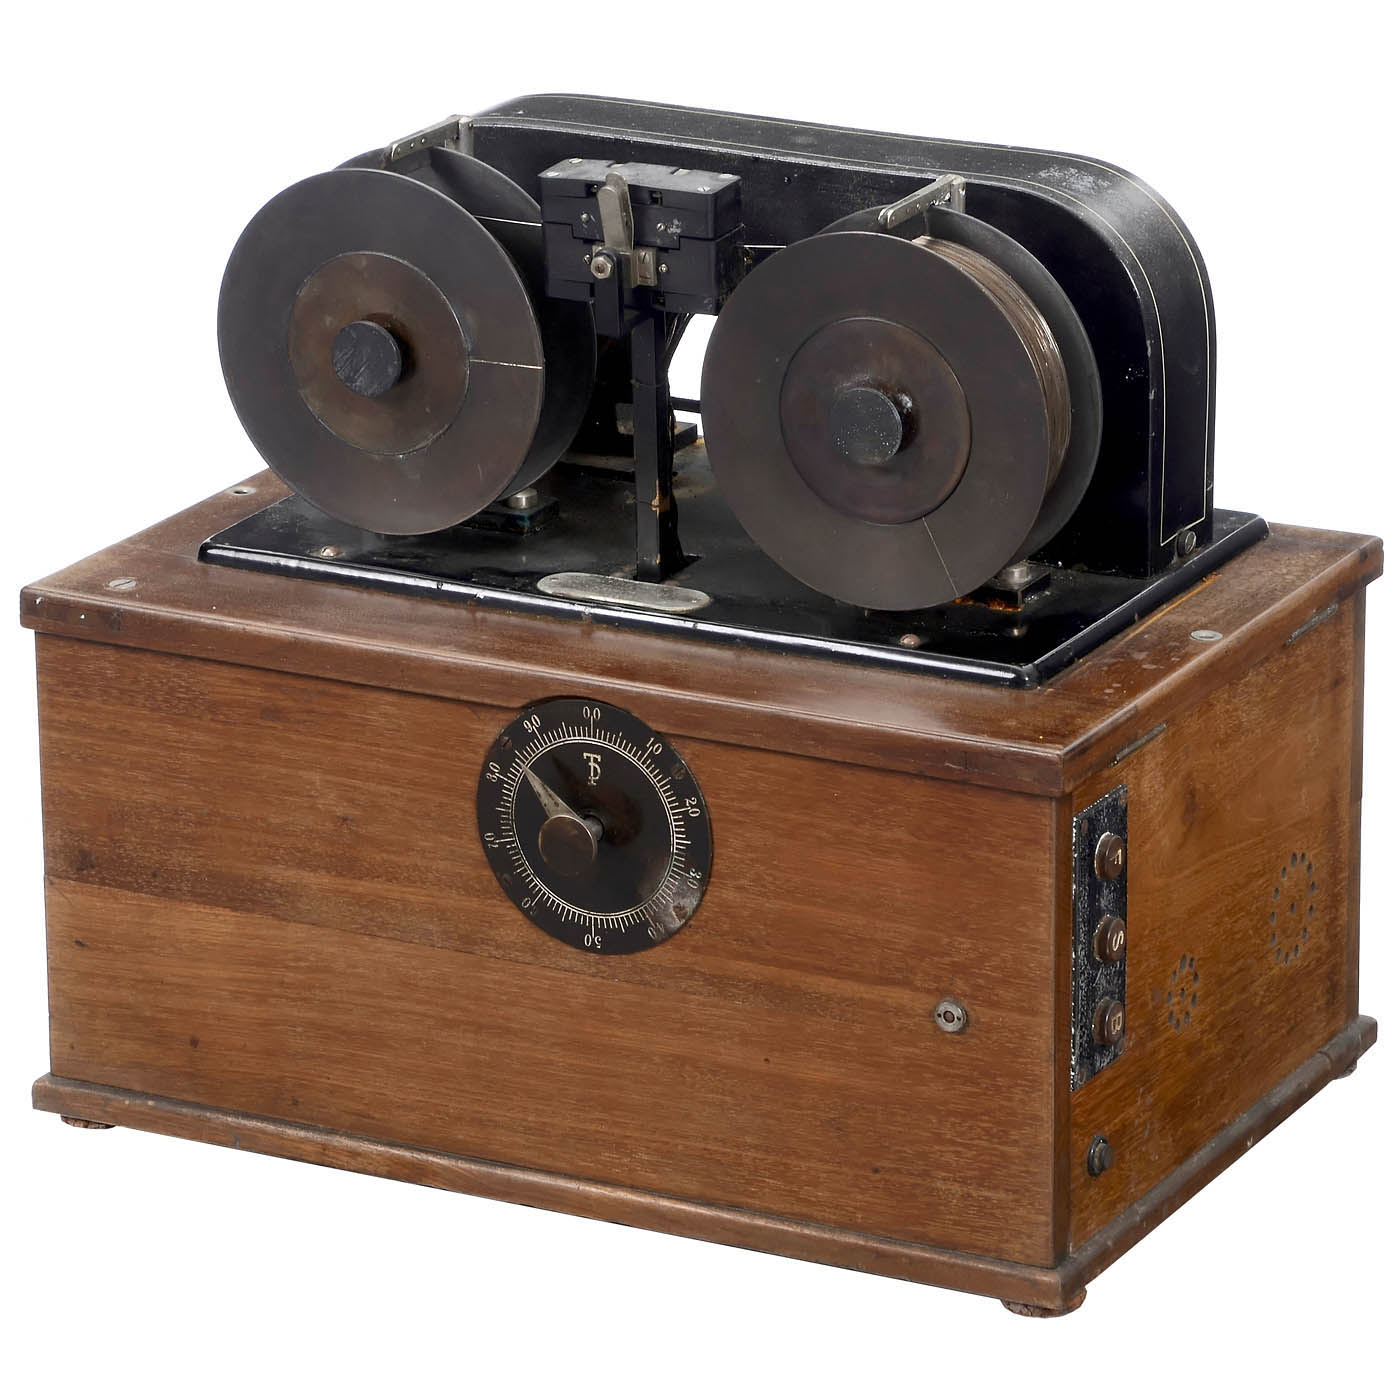 Telegraphone Magnetic Wire-Recording and Repeating Device, c. 1905 - Image 2 of 3